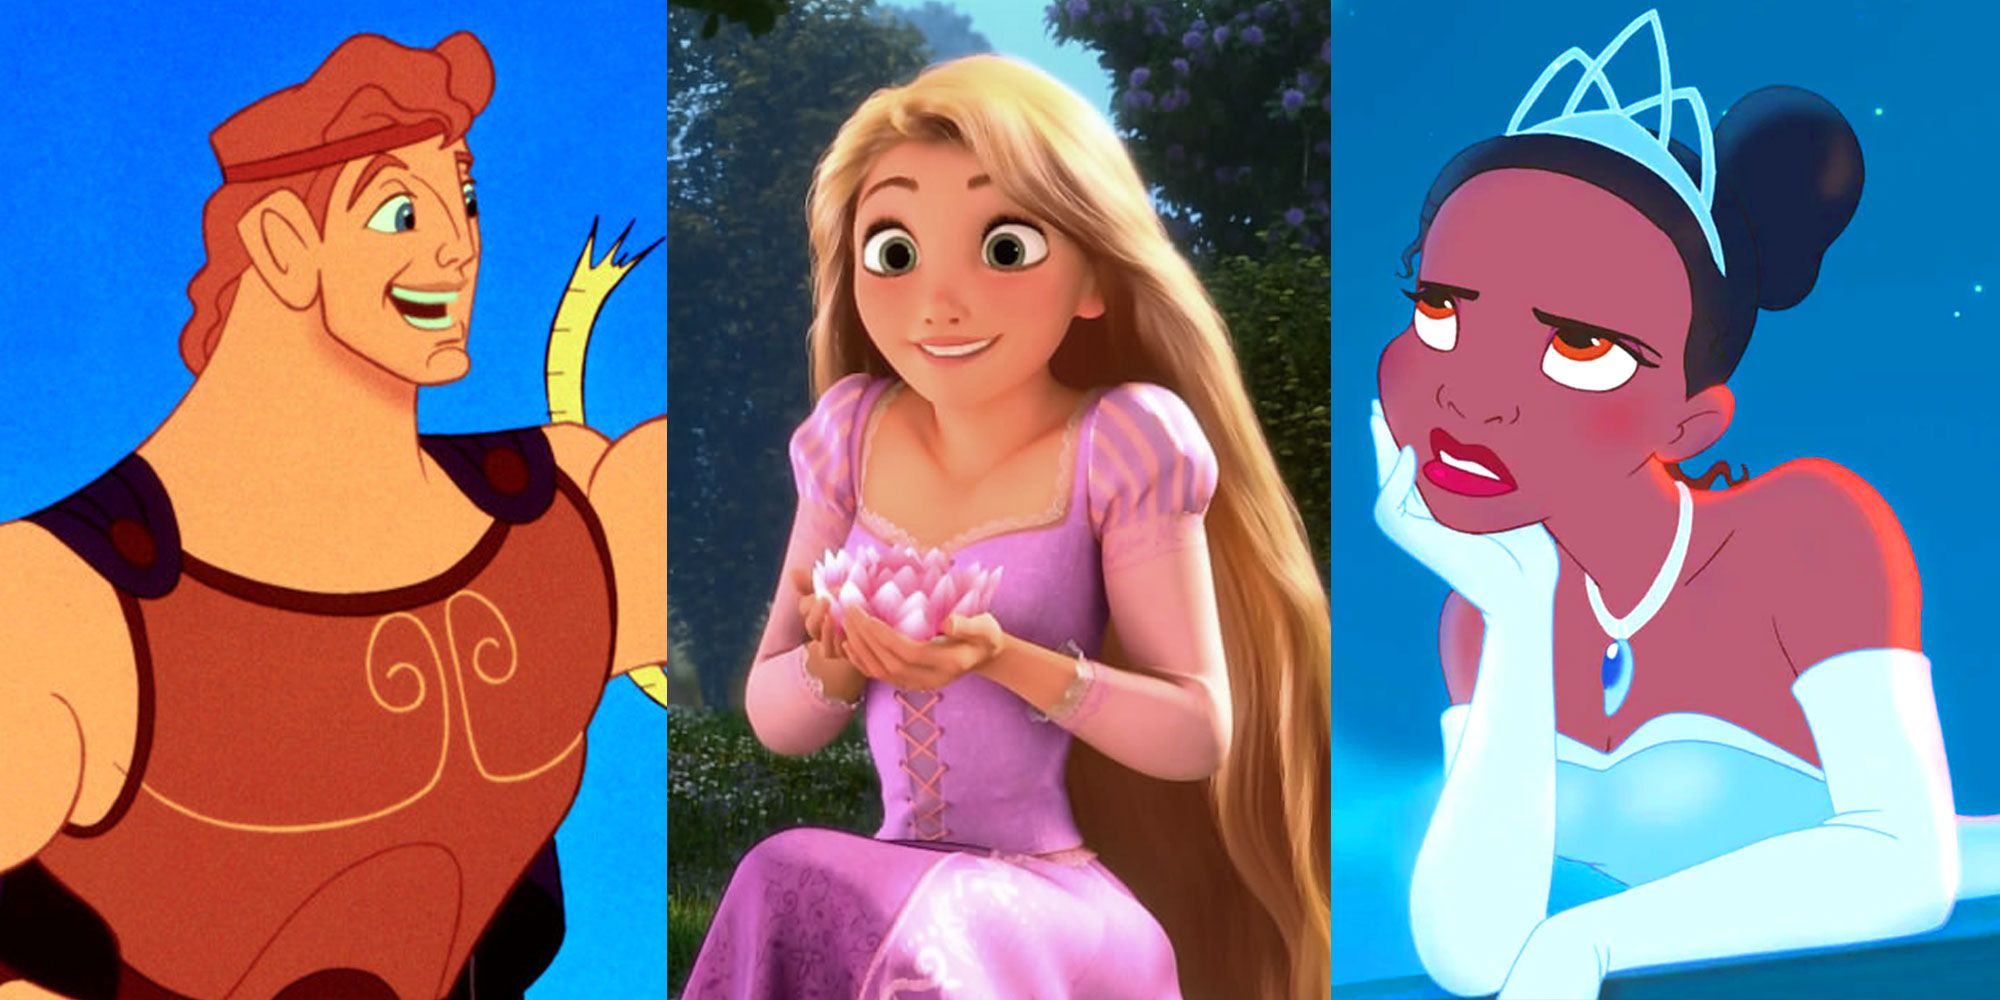 Three images side by side of Disney characters.